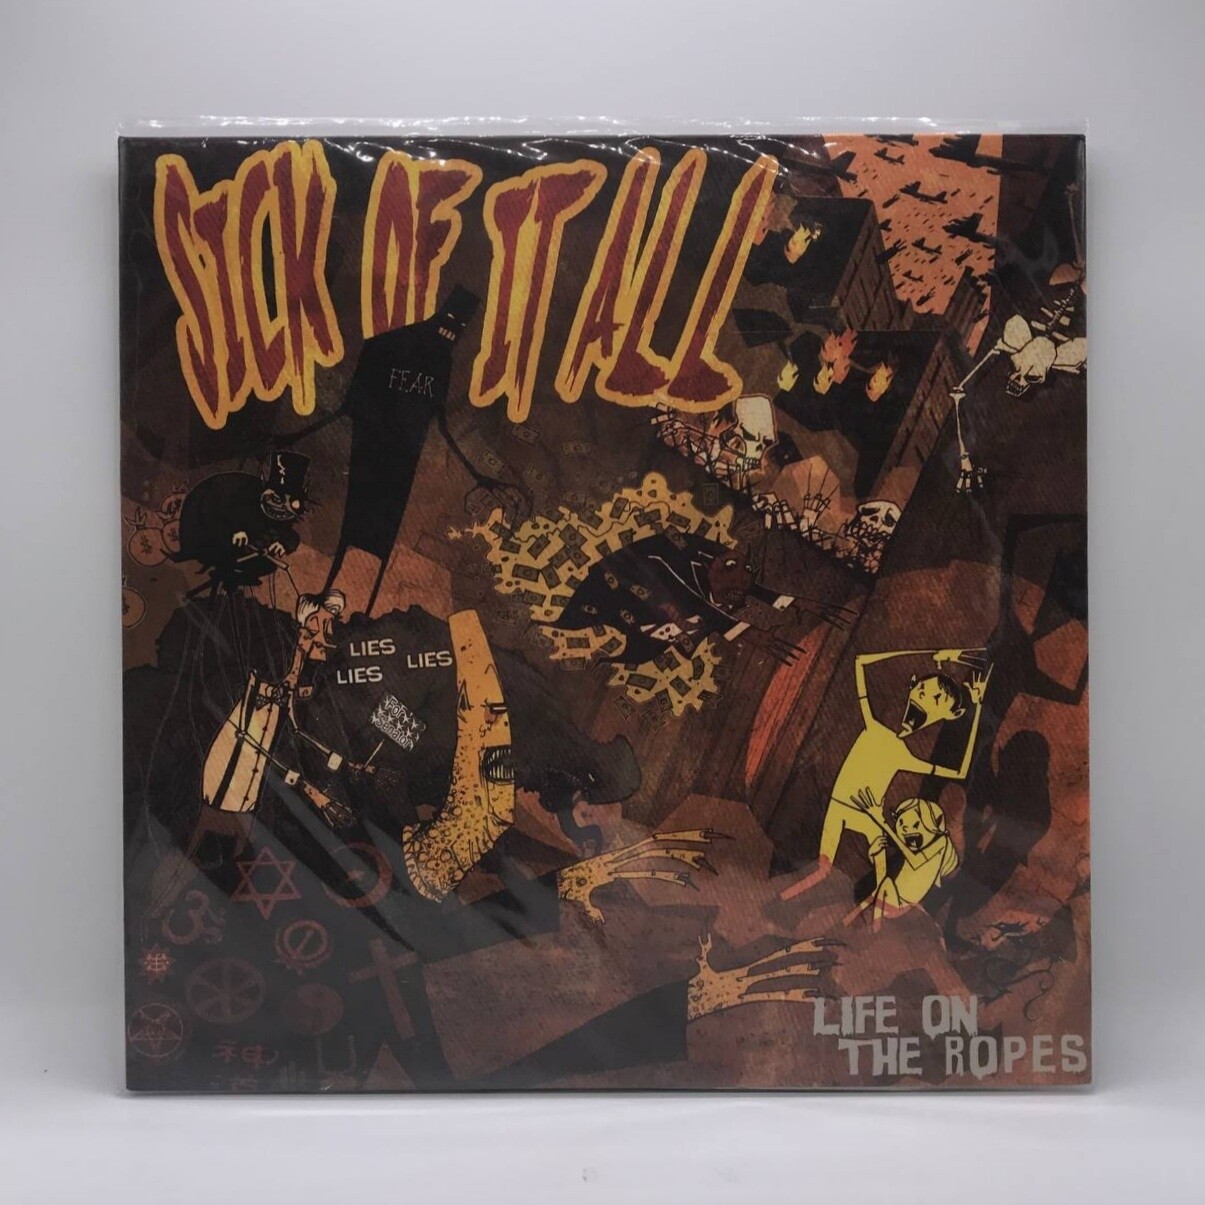 [USED] SICK OF IT ALL -LIFE ON THE ROPE- LP